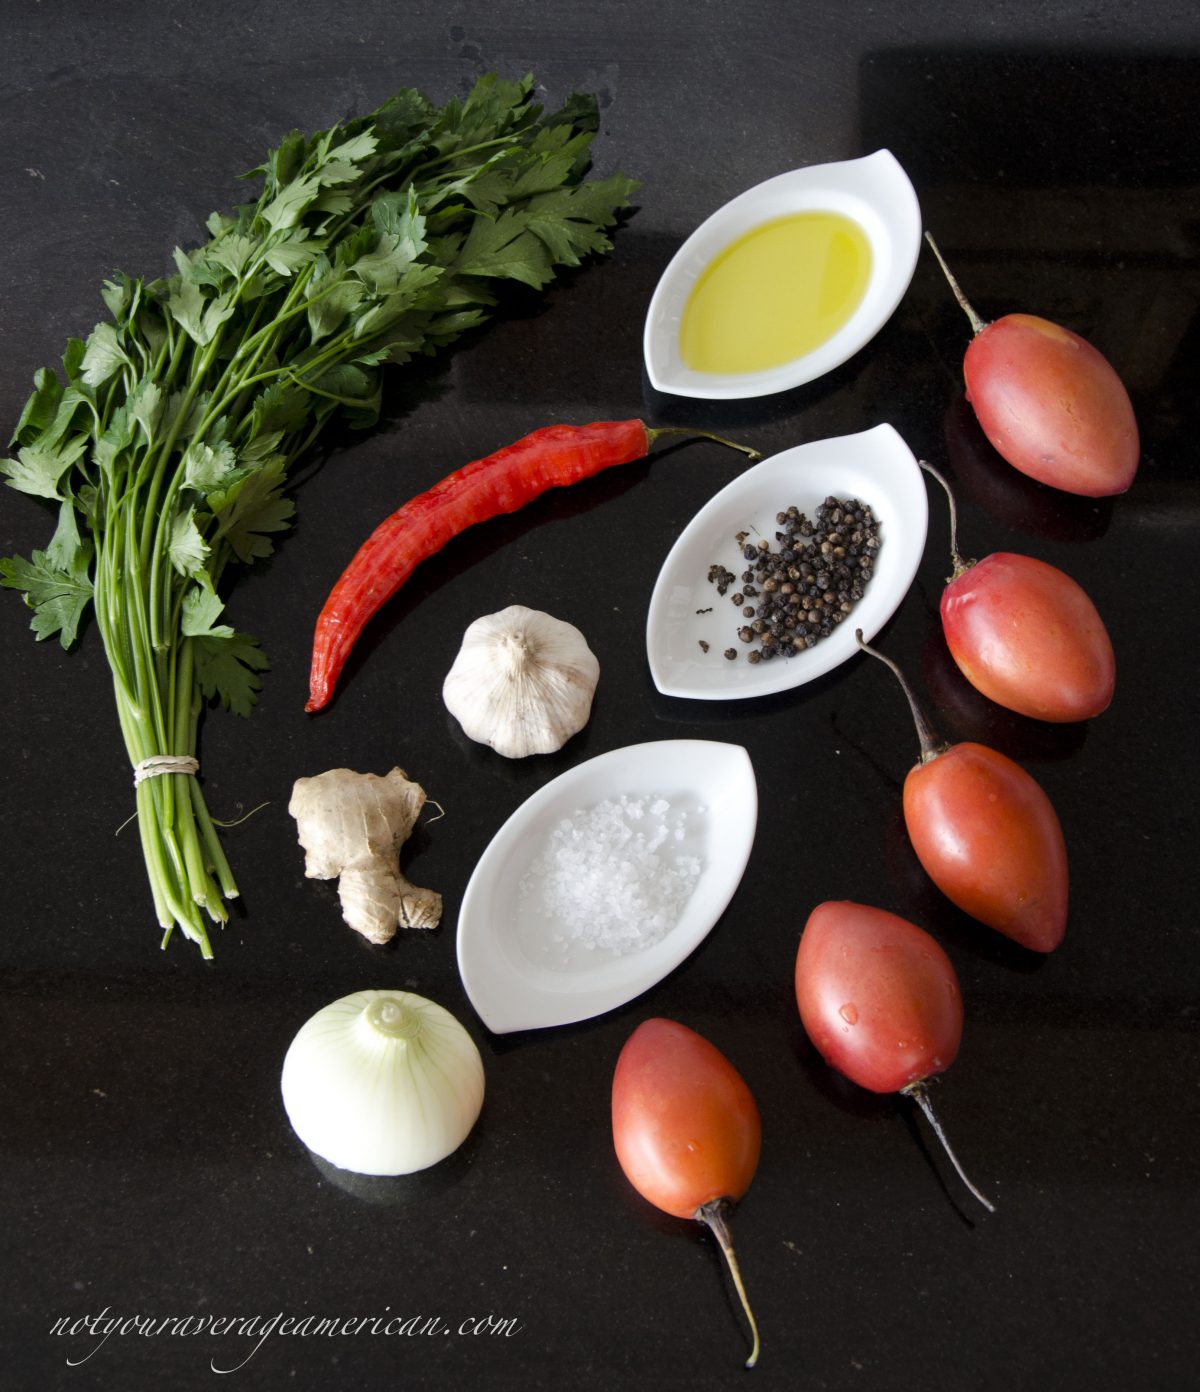 Ingredients for Ecuadorian Hot Sauce with Ginger